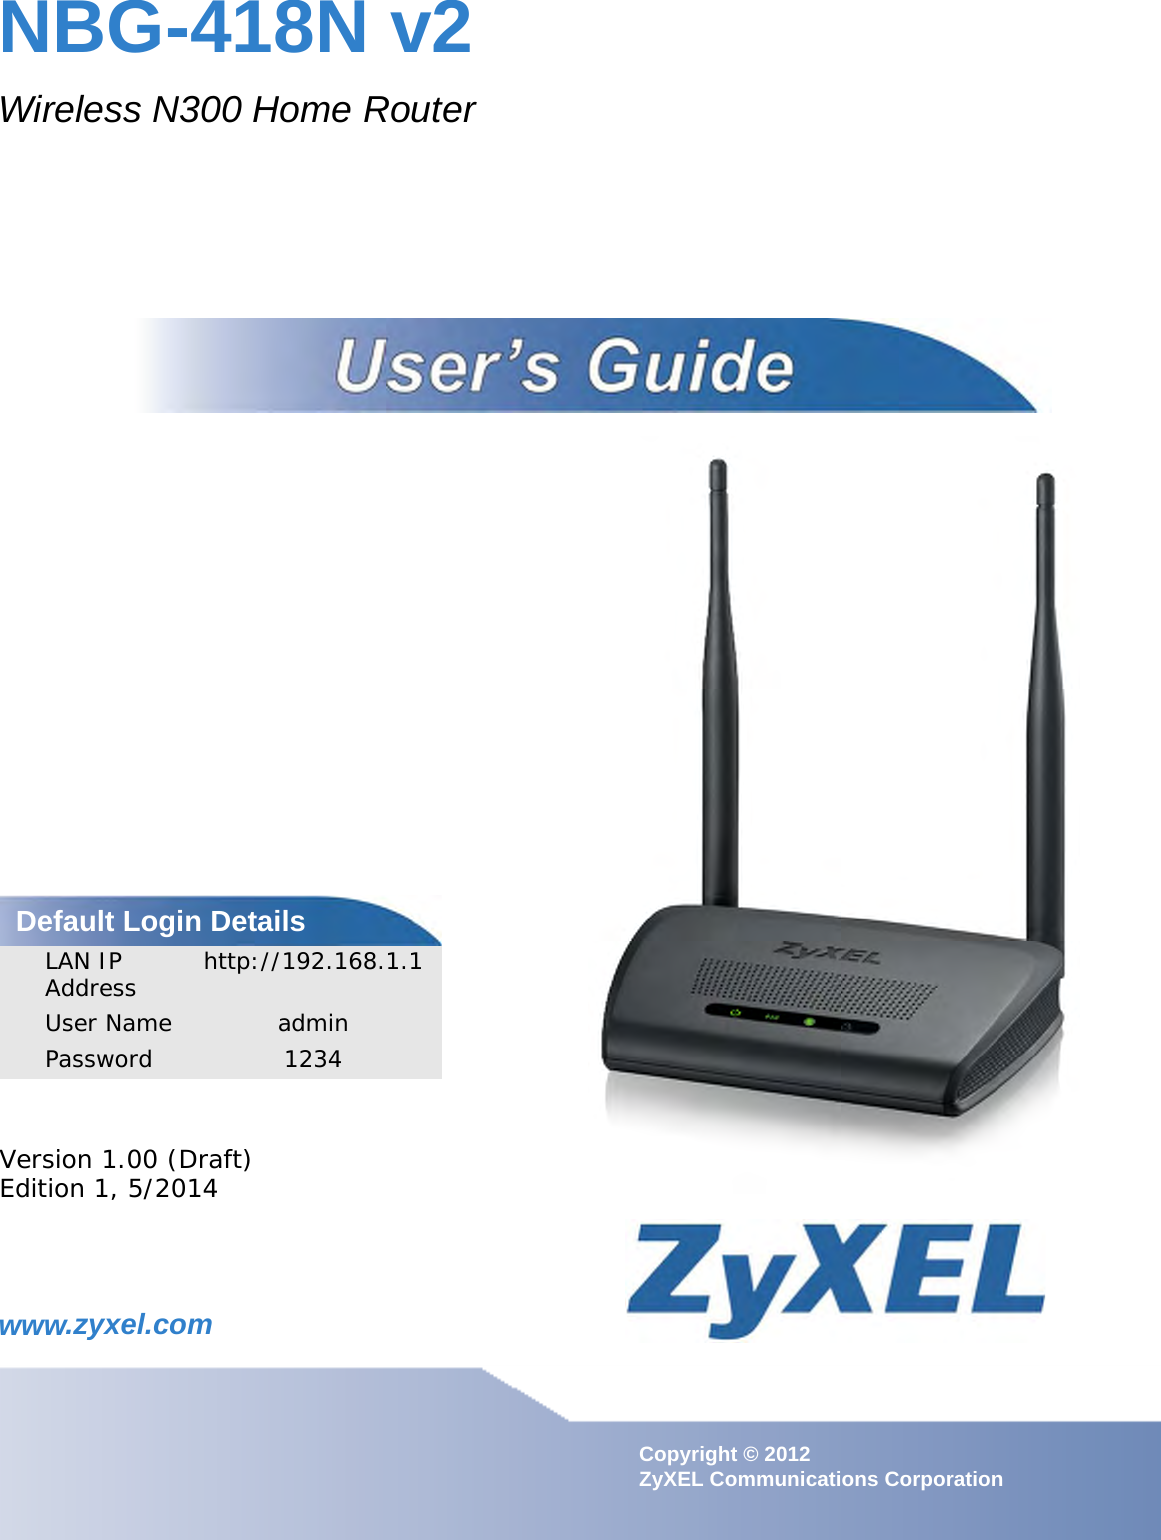 www.zyxel.comwww.zyxel.comNBG-418N v2Wireless N300 Home RouterIMPORTANT!READ CAREFULLY BEFORE USE.KEEP THIS GUIDE FOR FUTURE REFERENCE.IMPORTANT!Copyright © 2012 ZyXEL Communications CorporationVersion 1.00 (Draft)Edition 1, 5/2014Default Login DetailsLAN IP Address http://192.168.1.1User Name adminPassword 1234